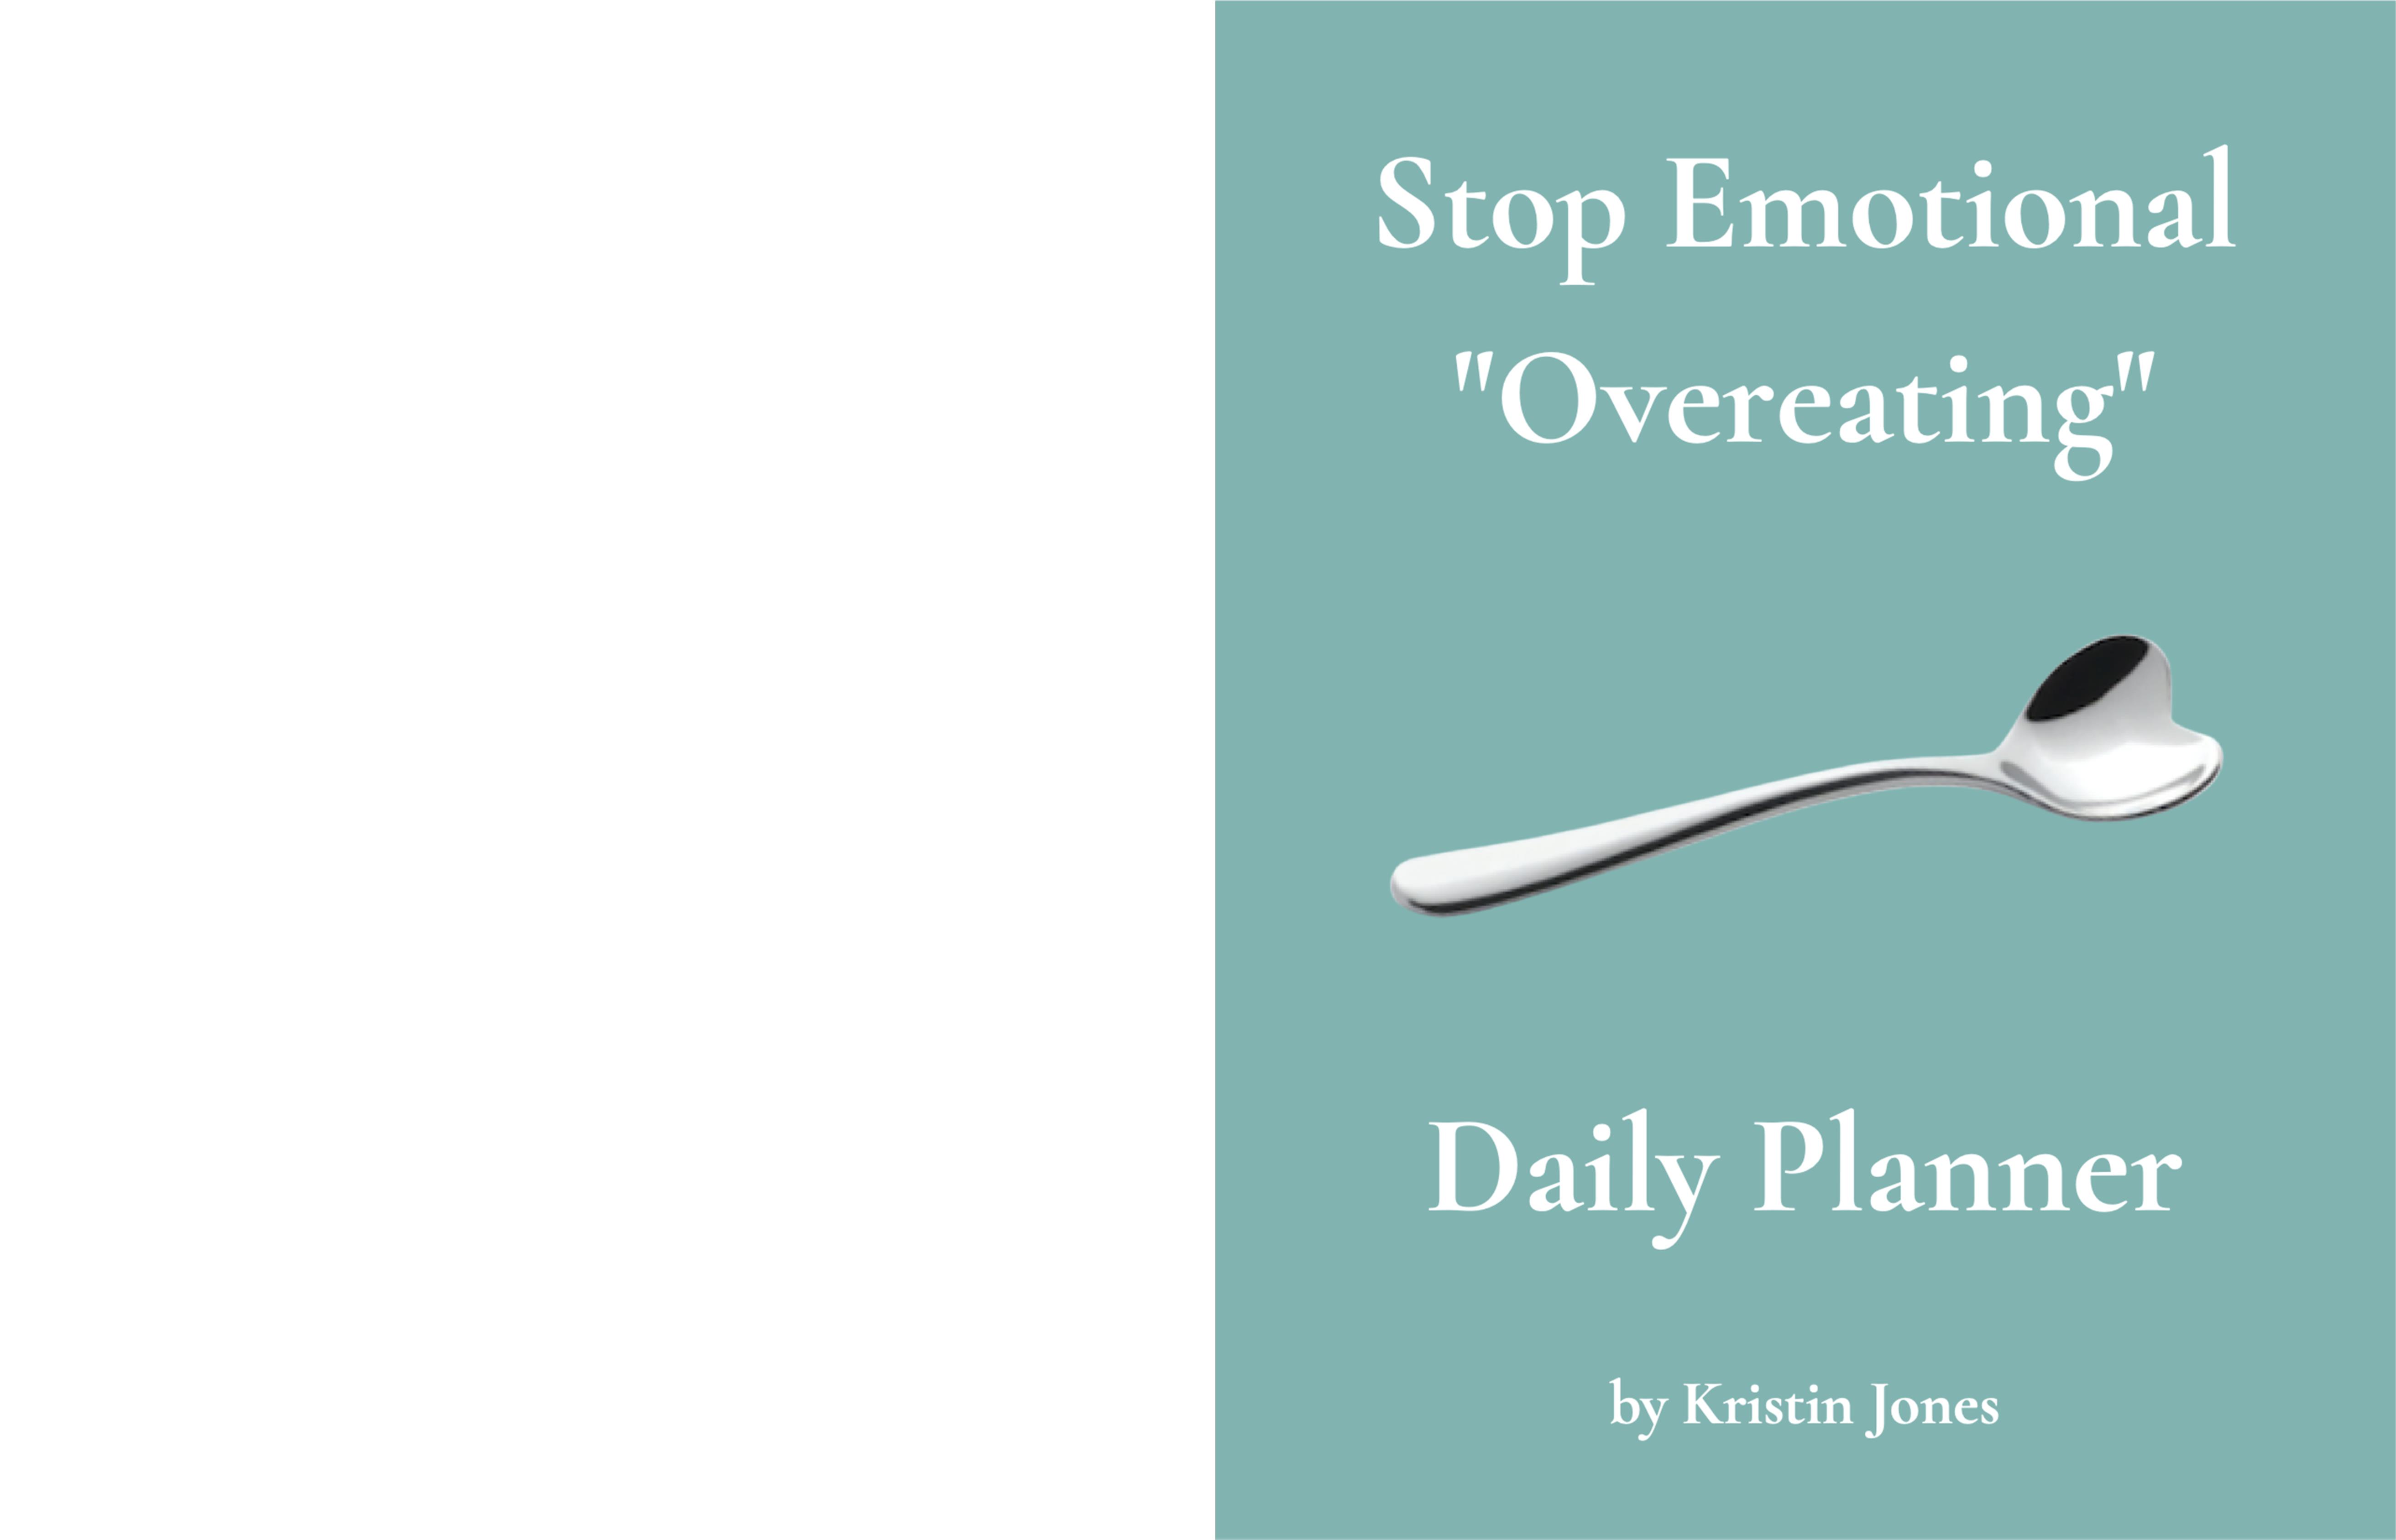 Stop Emotional "Overeating" Bootcamp Daily Planner cover image